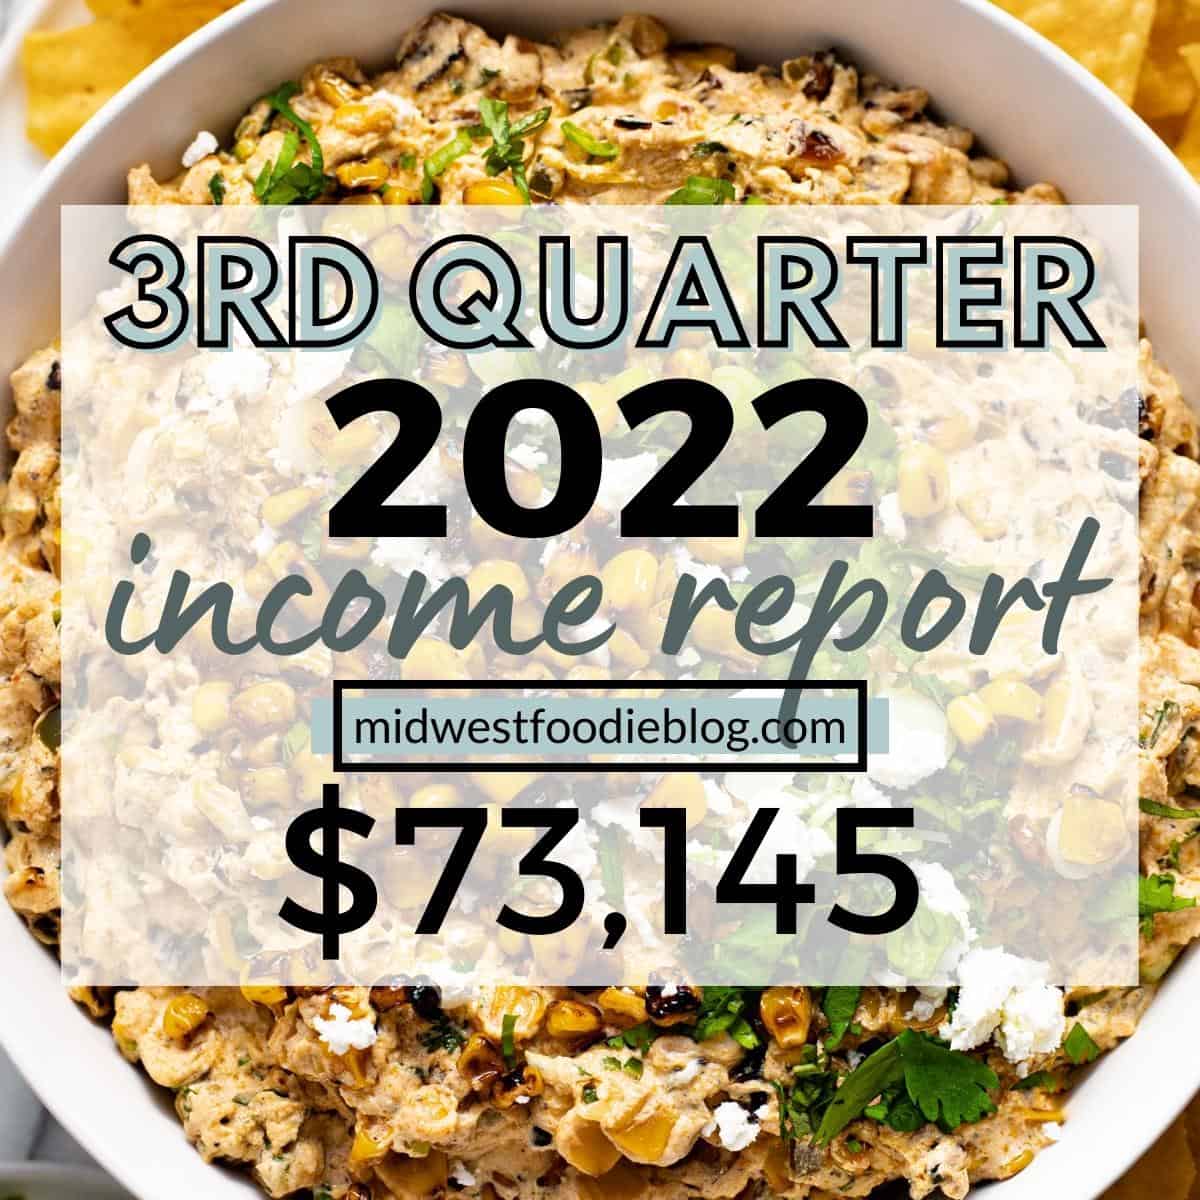 Info graphic that reads "3rd quarter 2022 income report midwestfoodieblog.com $73,145"